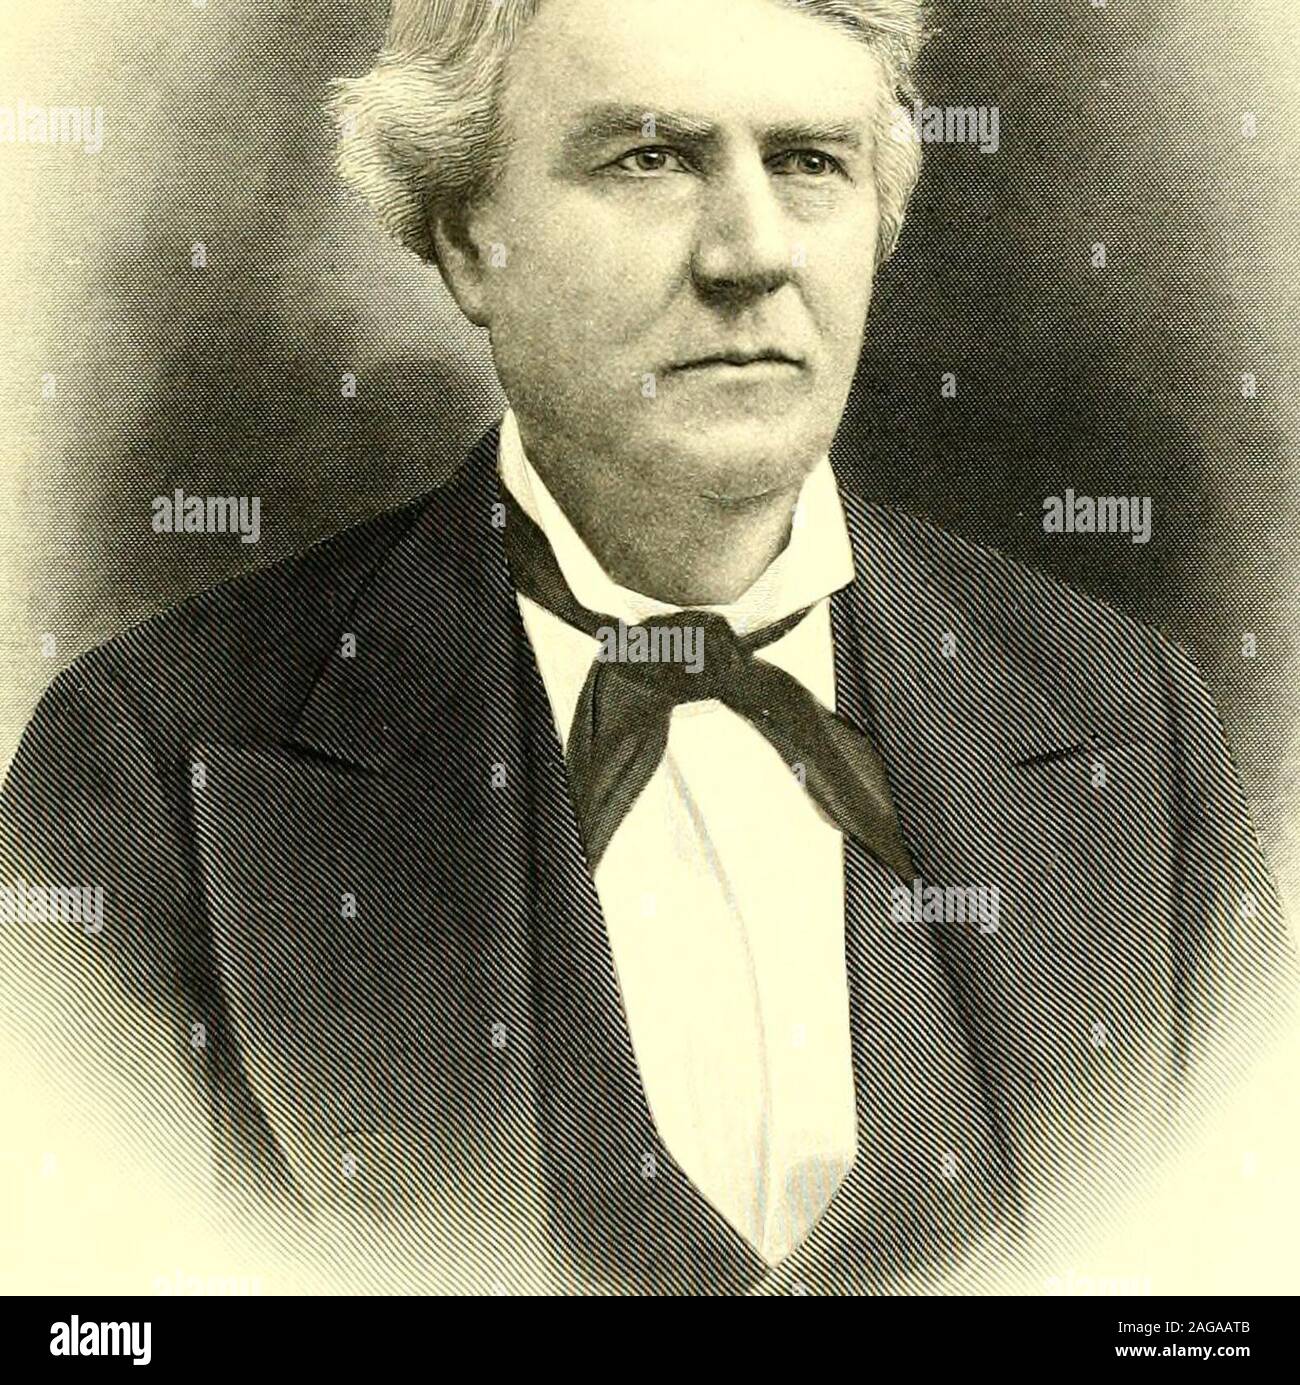 . West Virginia and its people. his district in the state legislature during the years 1871-77. Hewas one of the highly respected citizens of his county. He married, Sep-tember 13, 1849, Mary Ann Perry, born in Logan county, irginia, JuneT. 1831, died in Logan, October 24, 1896. Children: i. David, bornJanuary 4, 1853, died May 15, 1890: married Nancy Beverley. 2. .Al-len, born June 7, 1855 ; married Jane Deskins. and resides in Williani-son. West Virginia. 3. Victoria, born December 23, 1857. died April 2^.1858. 4. Minnie, born June 12, 1859: married John F. .Aldrich ; she diedSeptember 17, Stock Photo